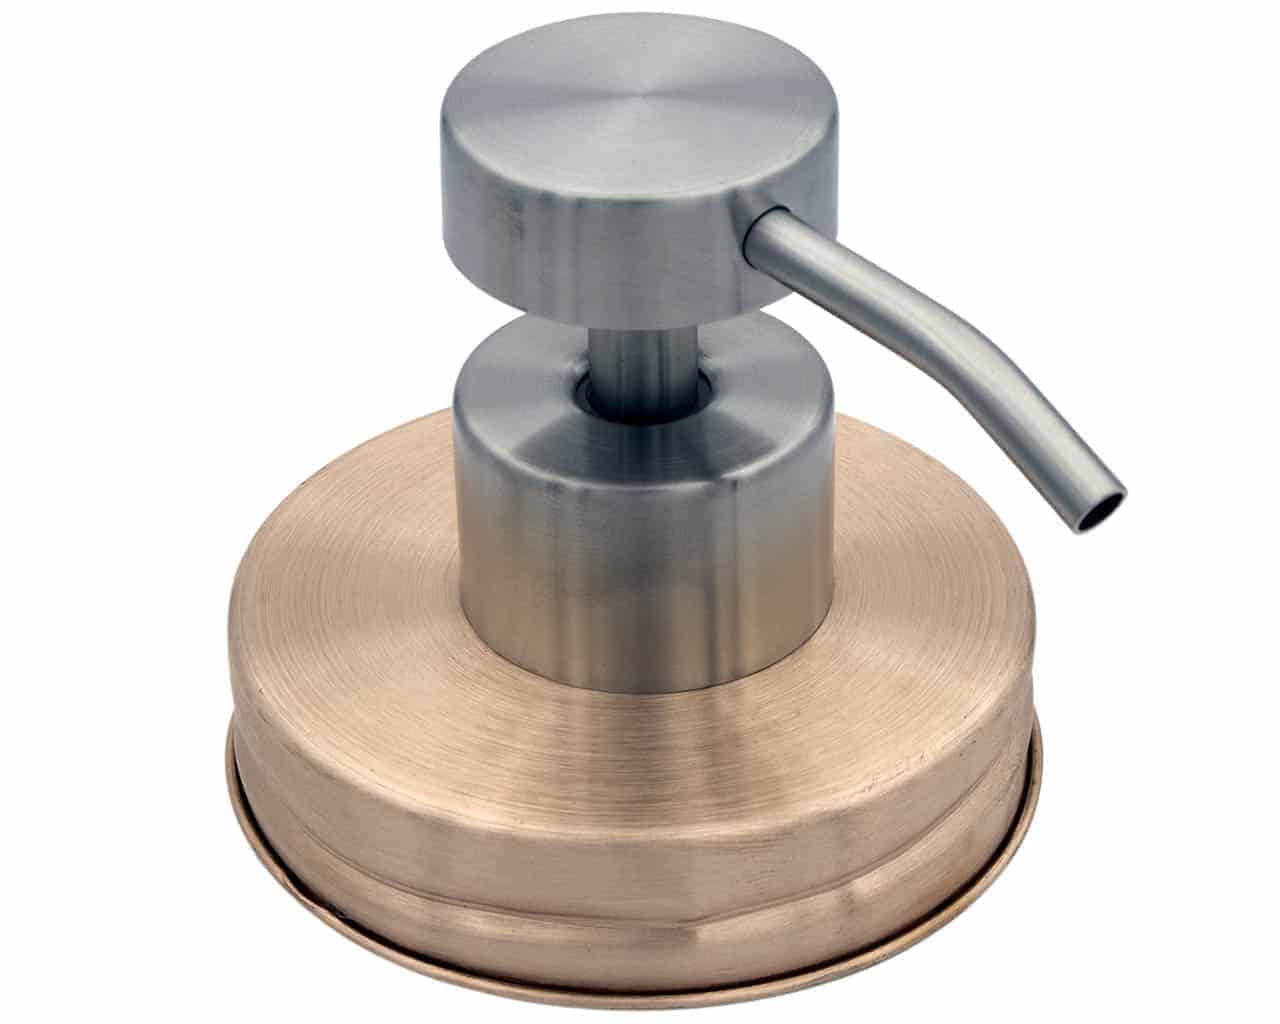 Real copper soap dispenser lid adapter with satin #2 pump